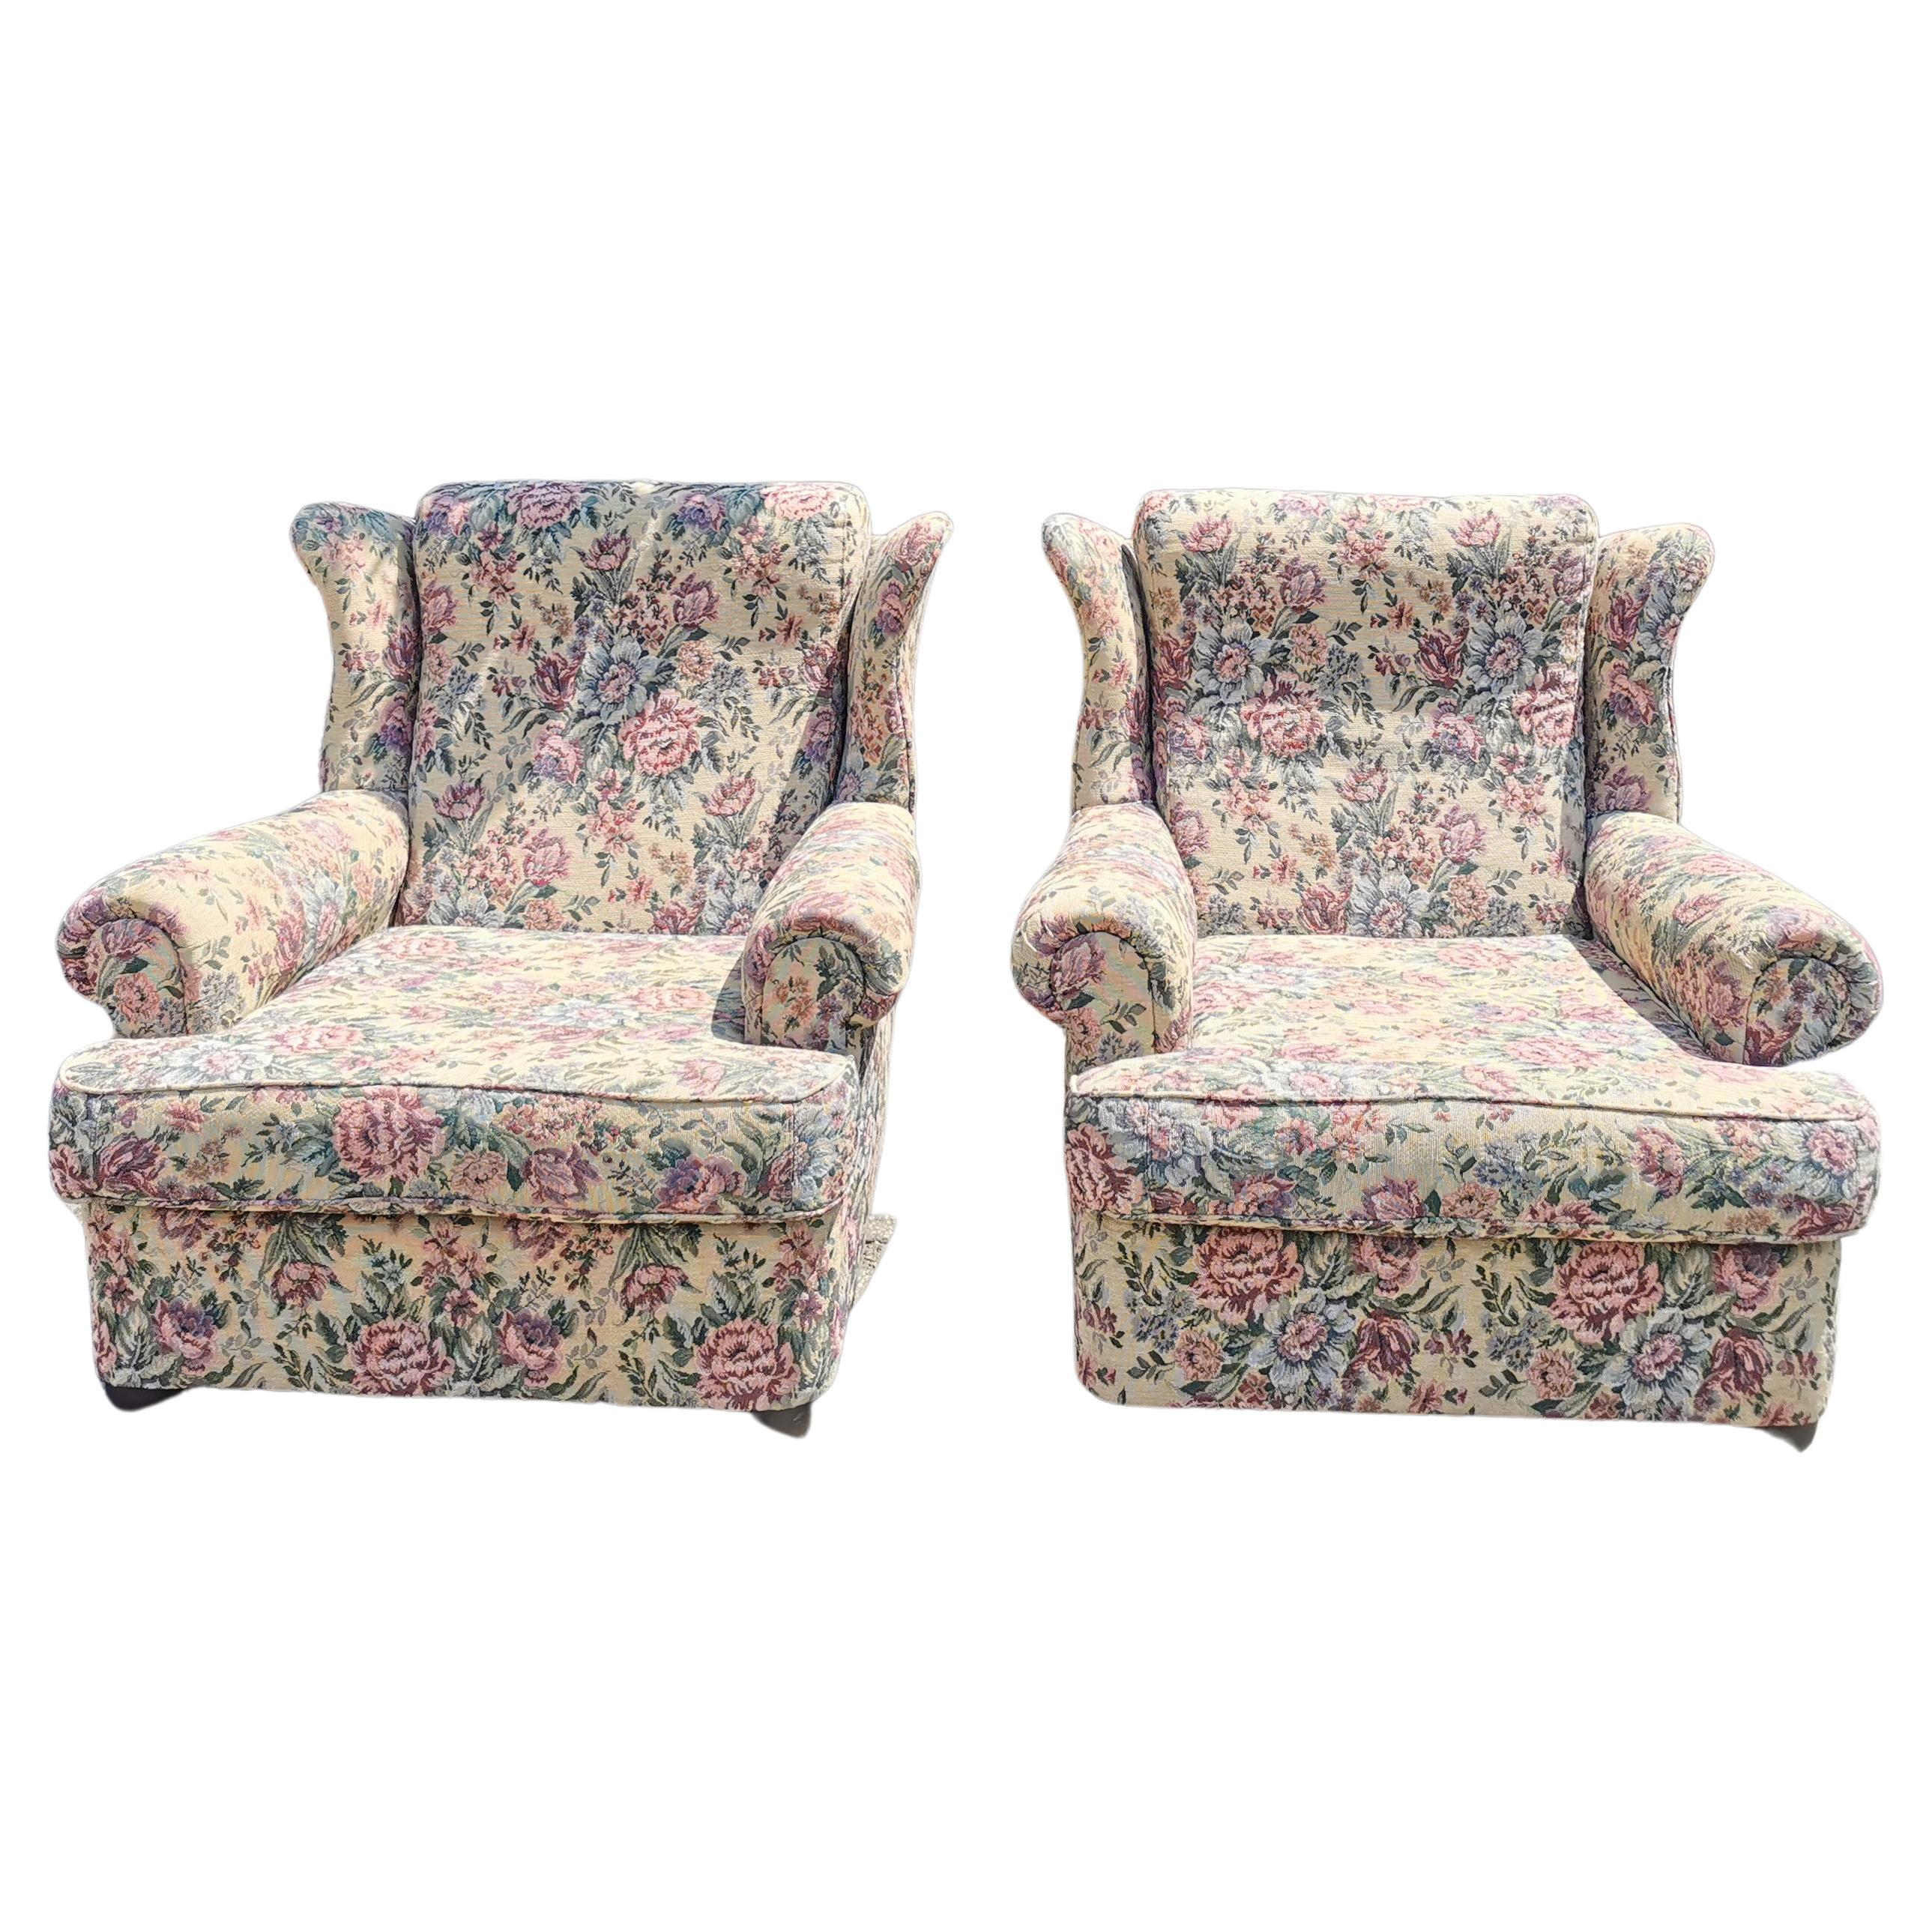 Pair of Lounge Chairs with Flower motifs circa 1950 Italy